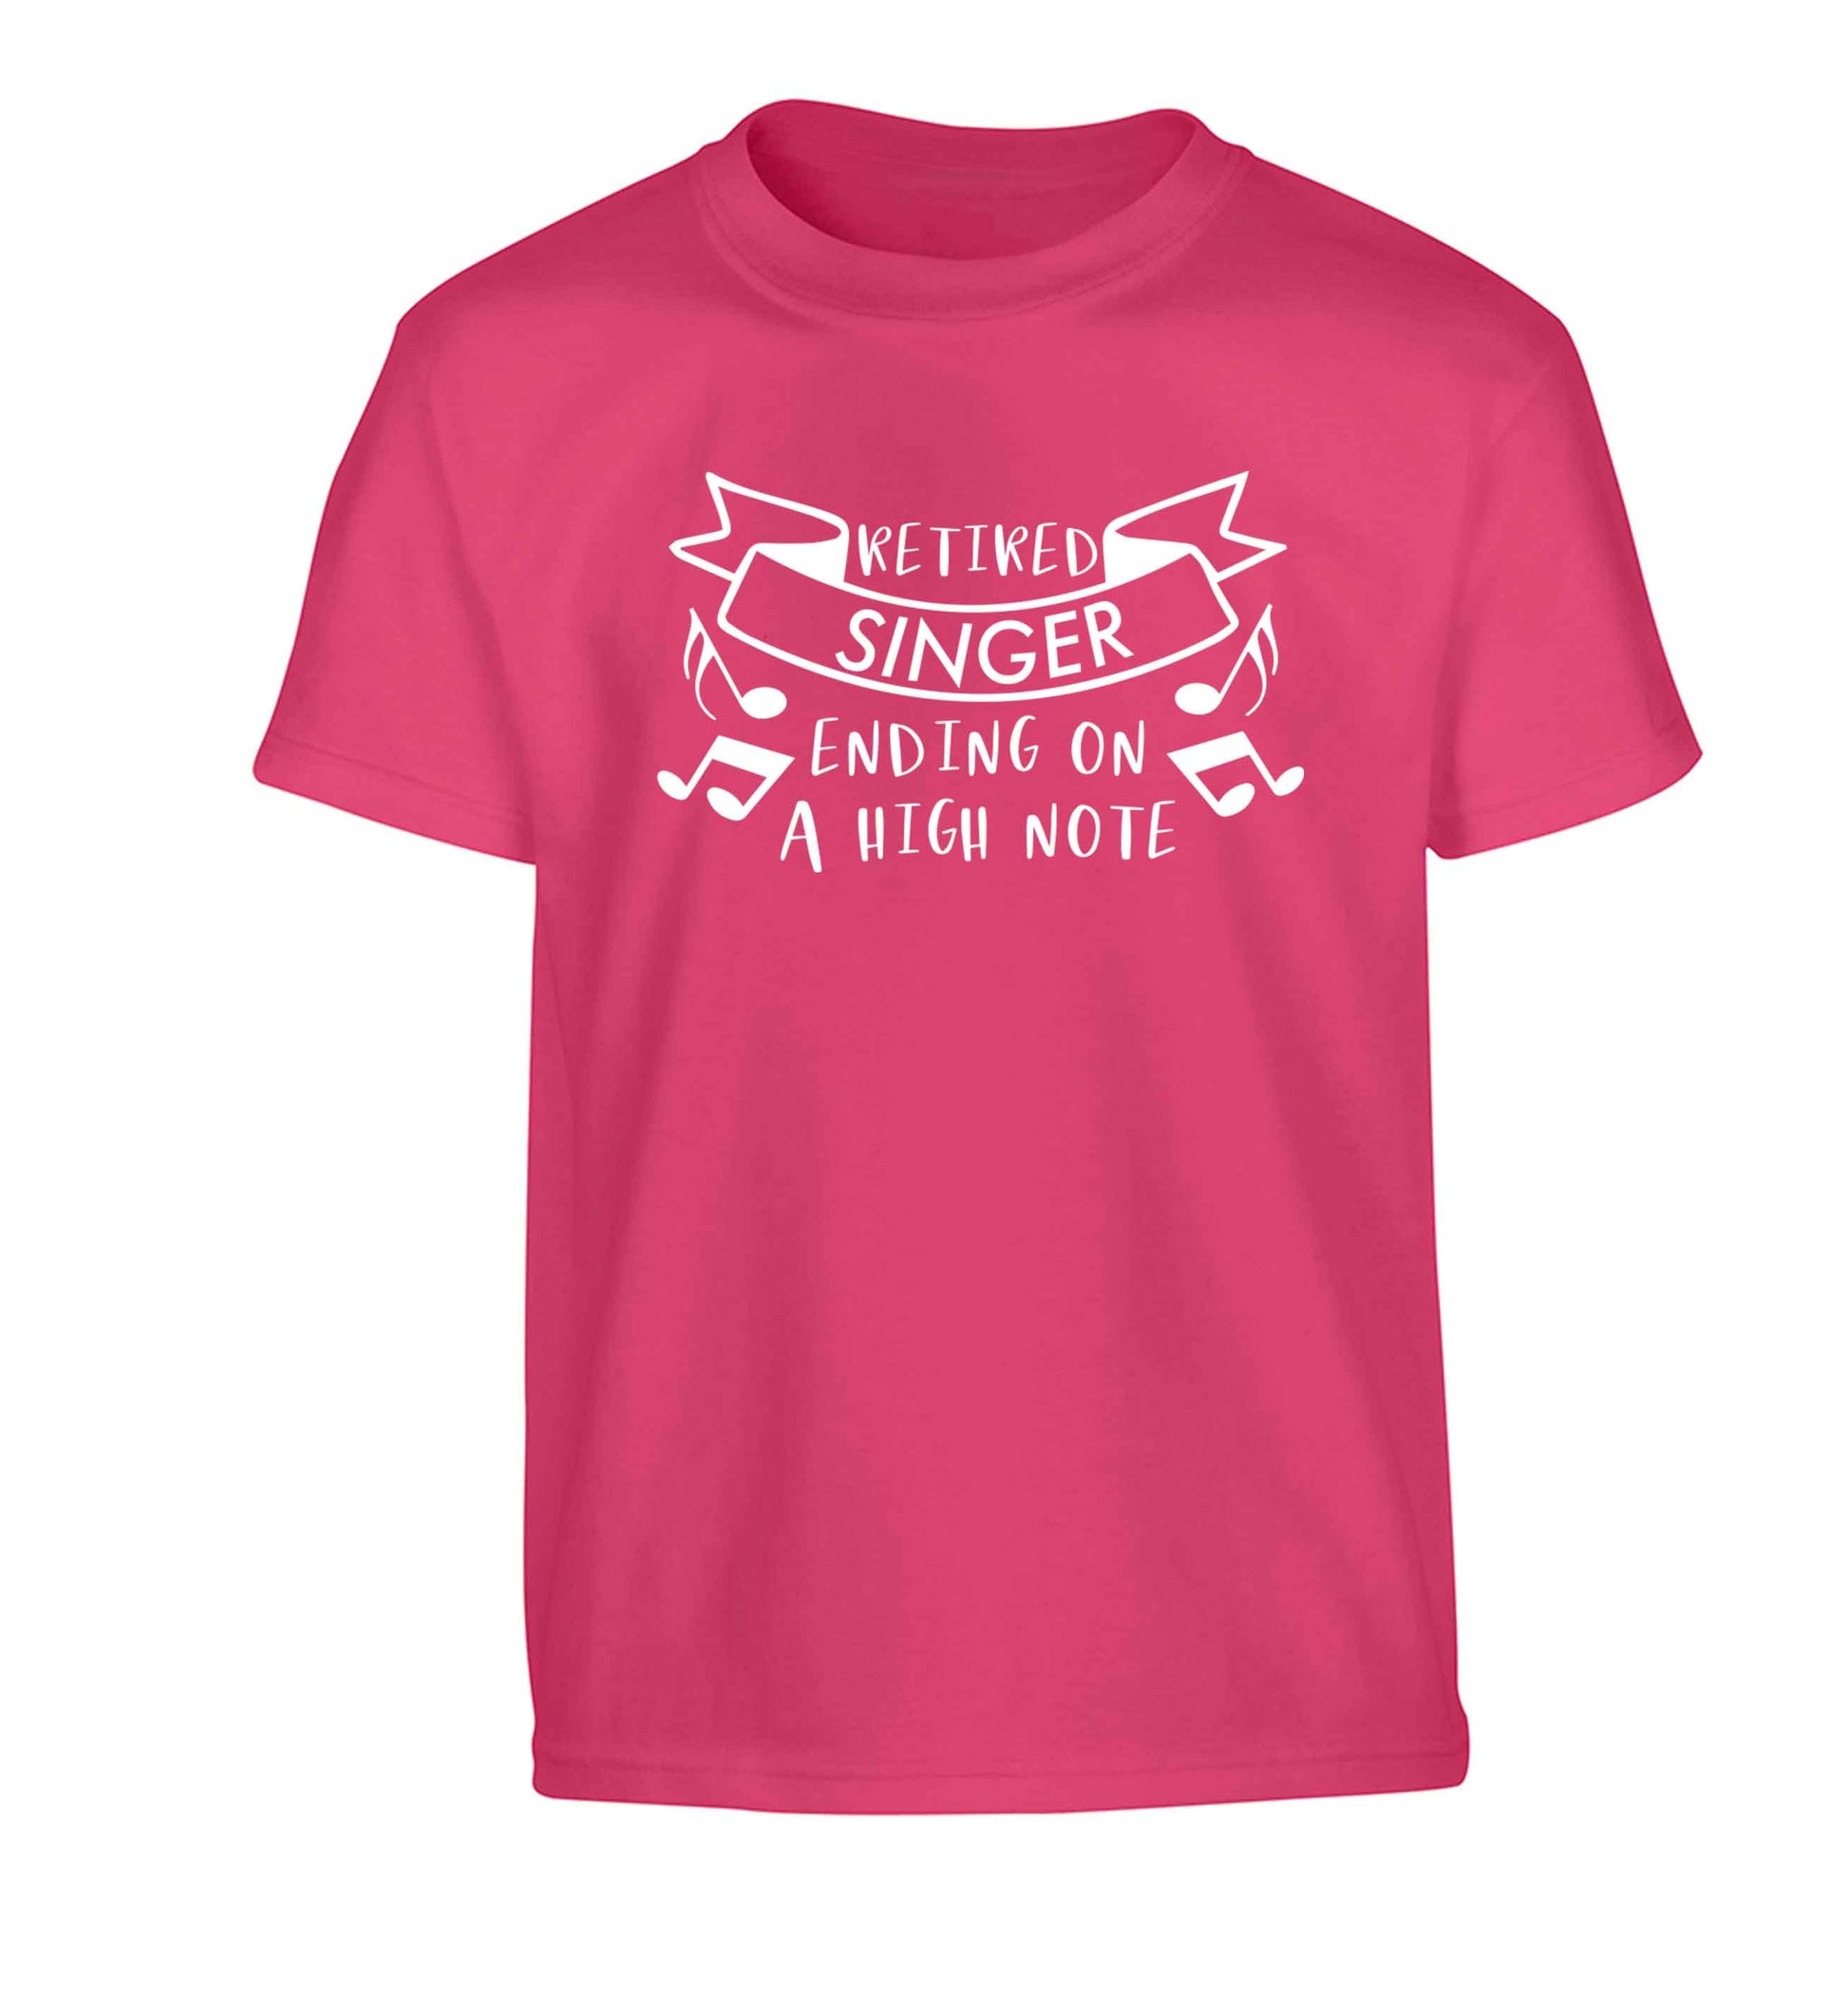 Retired singer ending on a high note Children's pink Tshirt 12-13 Years